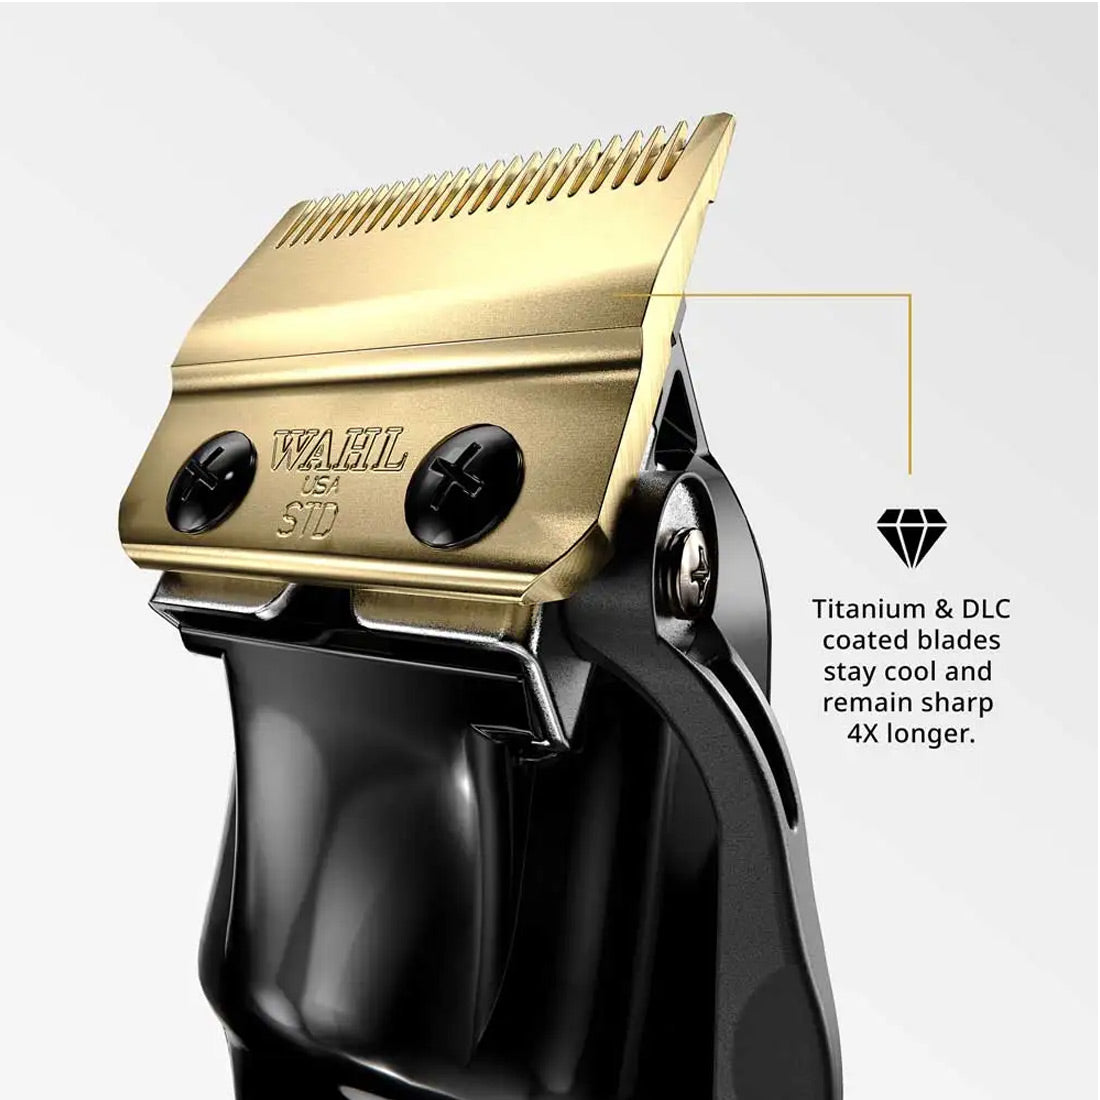 Wahl Professional 5 Star Black Cord or Cordless Magic Clip Hair Clipper Information about Blade